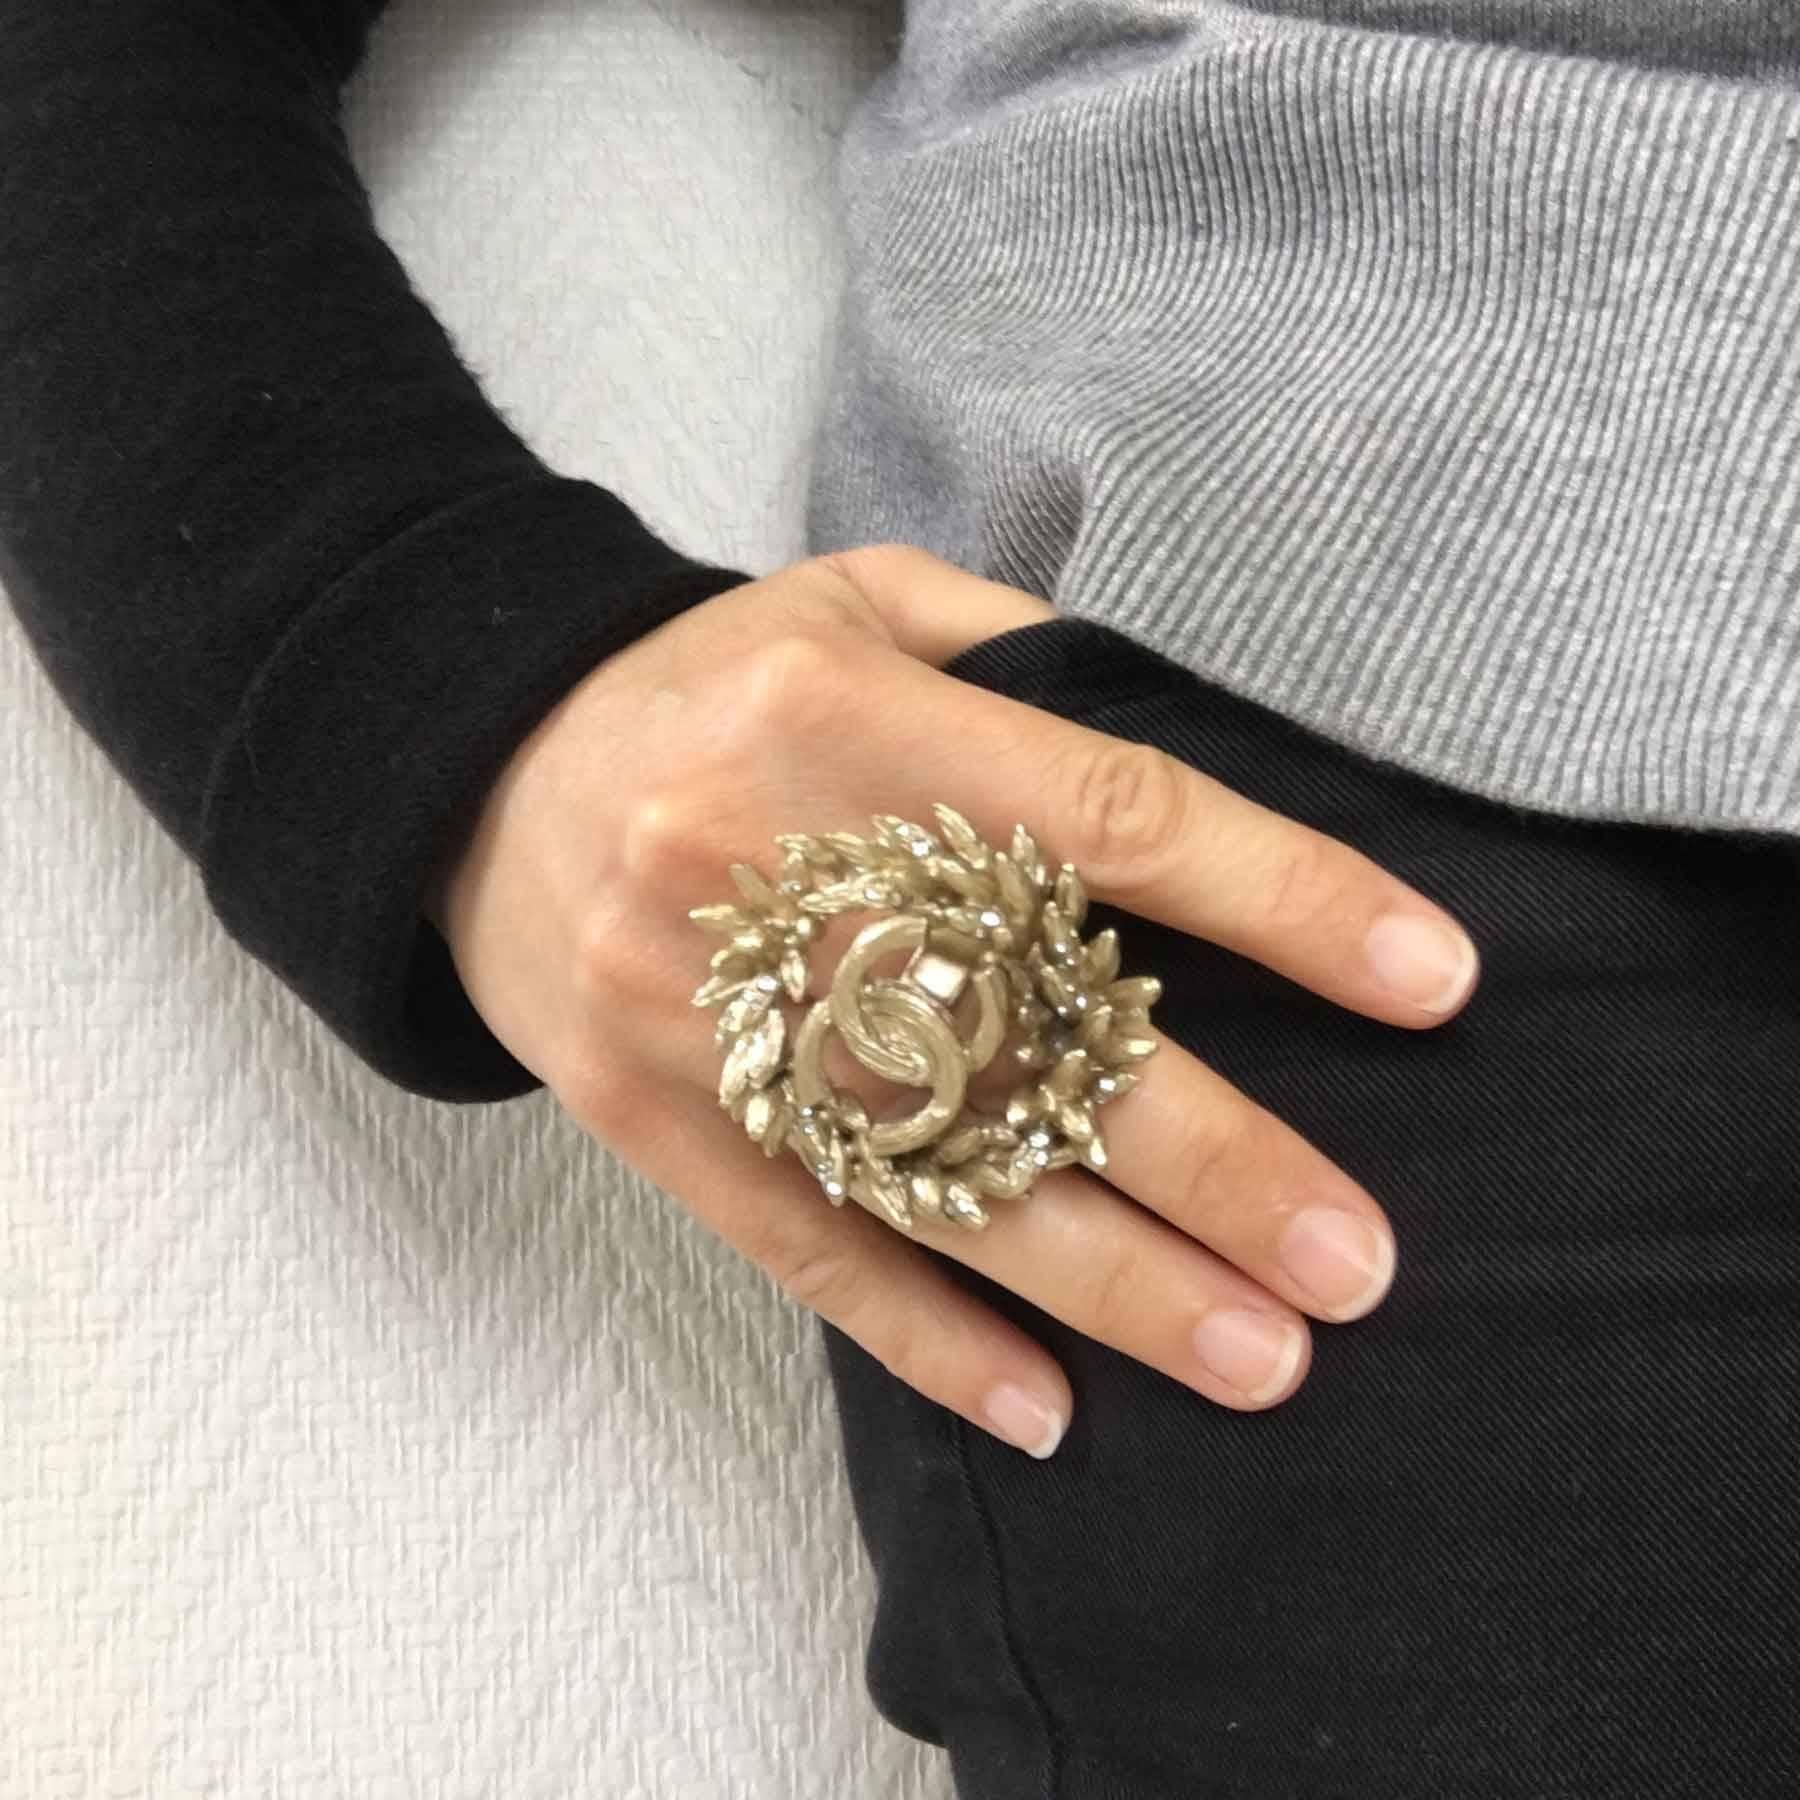 Very beautiful Chanel ring crown ear of wheat in gilded metal set with small brilliants all round. A beautiful CC is in the center of the ring, a smaller one on the ring. Summer Collection 2011

Dimensions: crown: 5 cm diameter, Size 53 FR - 6.5